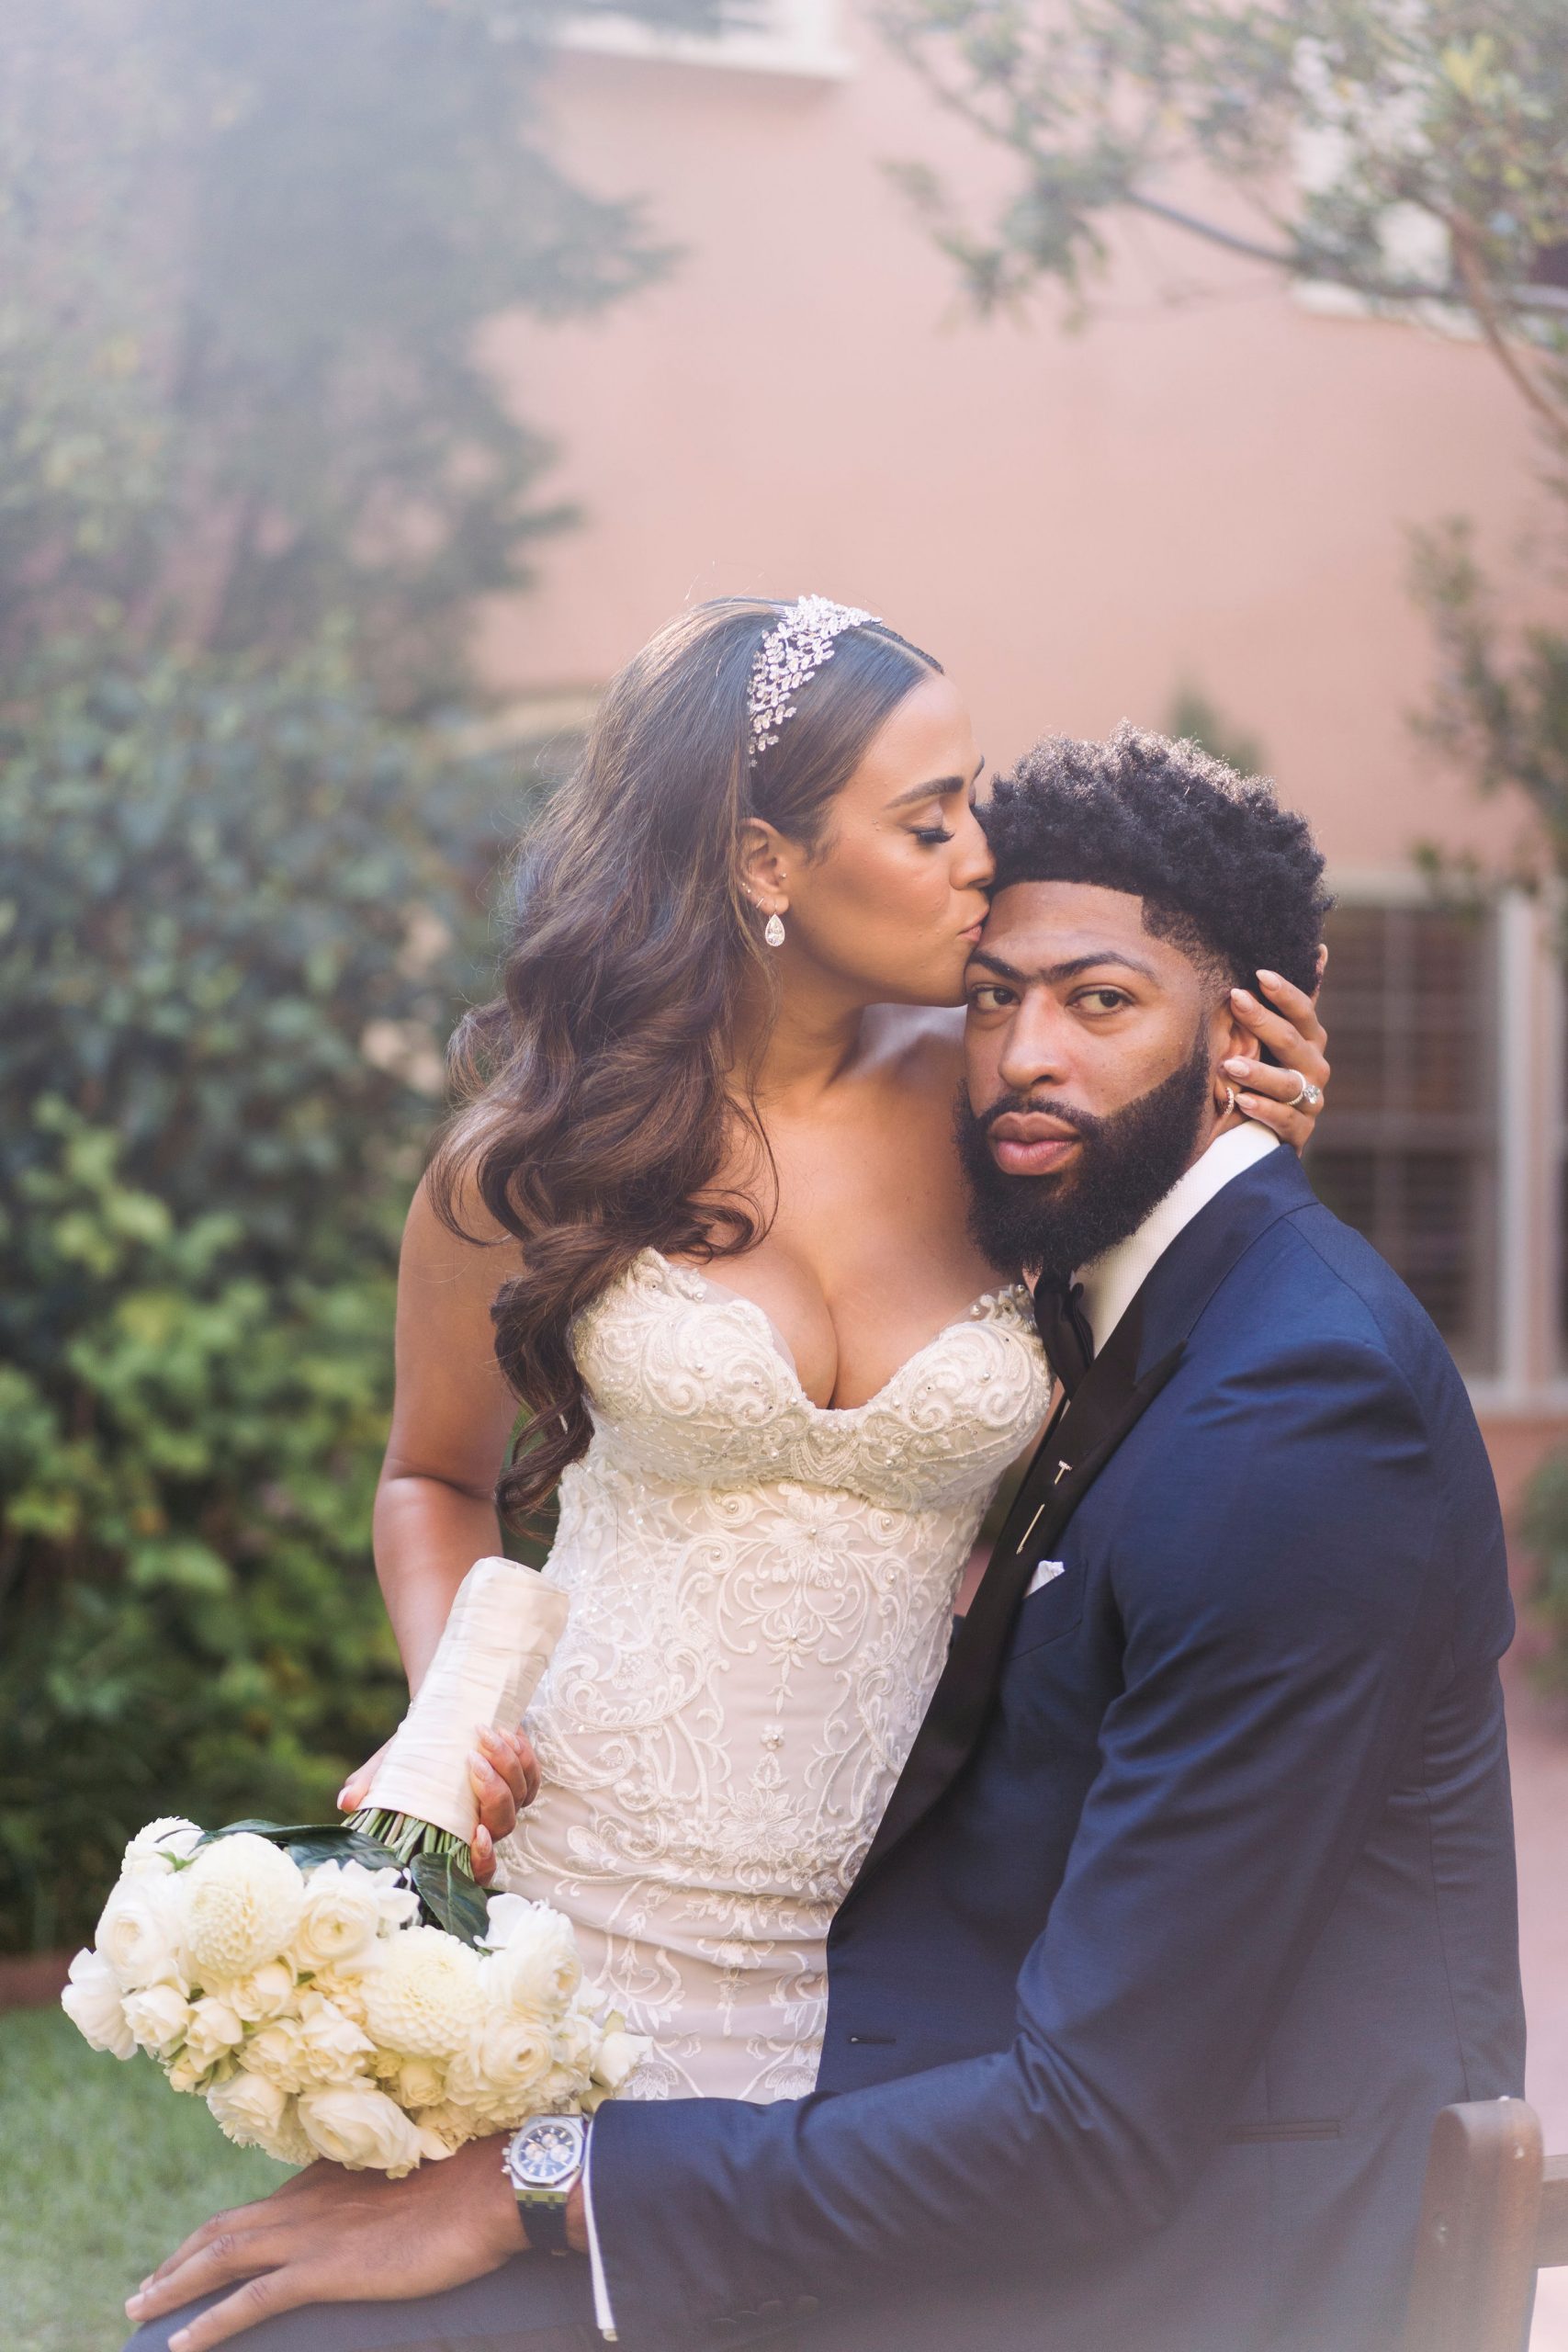 Exploring the Life of Marlen Davis, Wife of Lakers NBA Star Anthony Davis